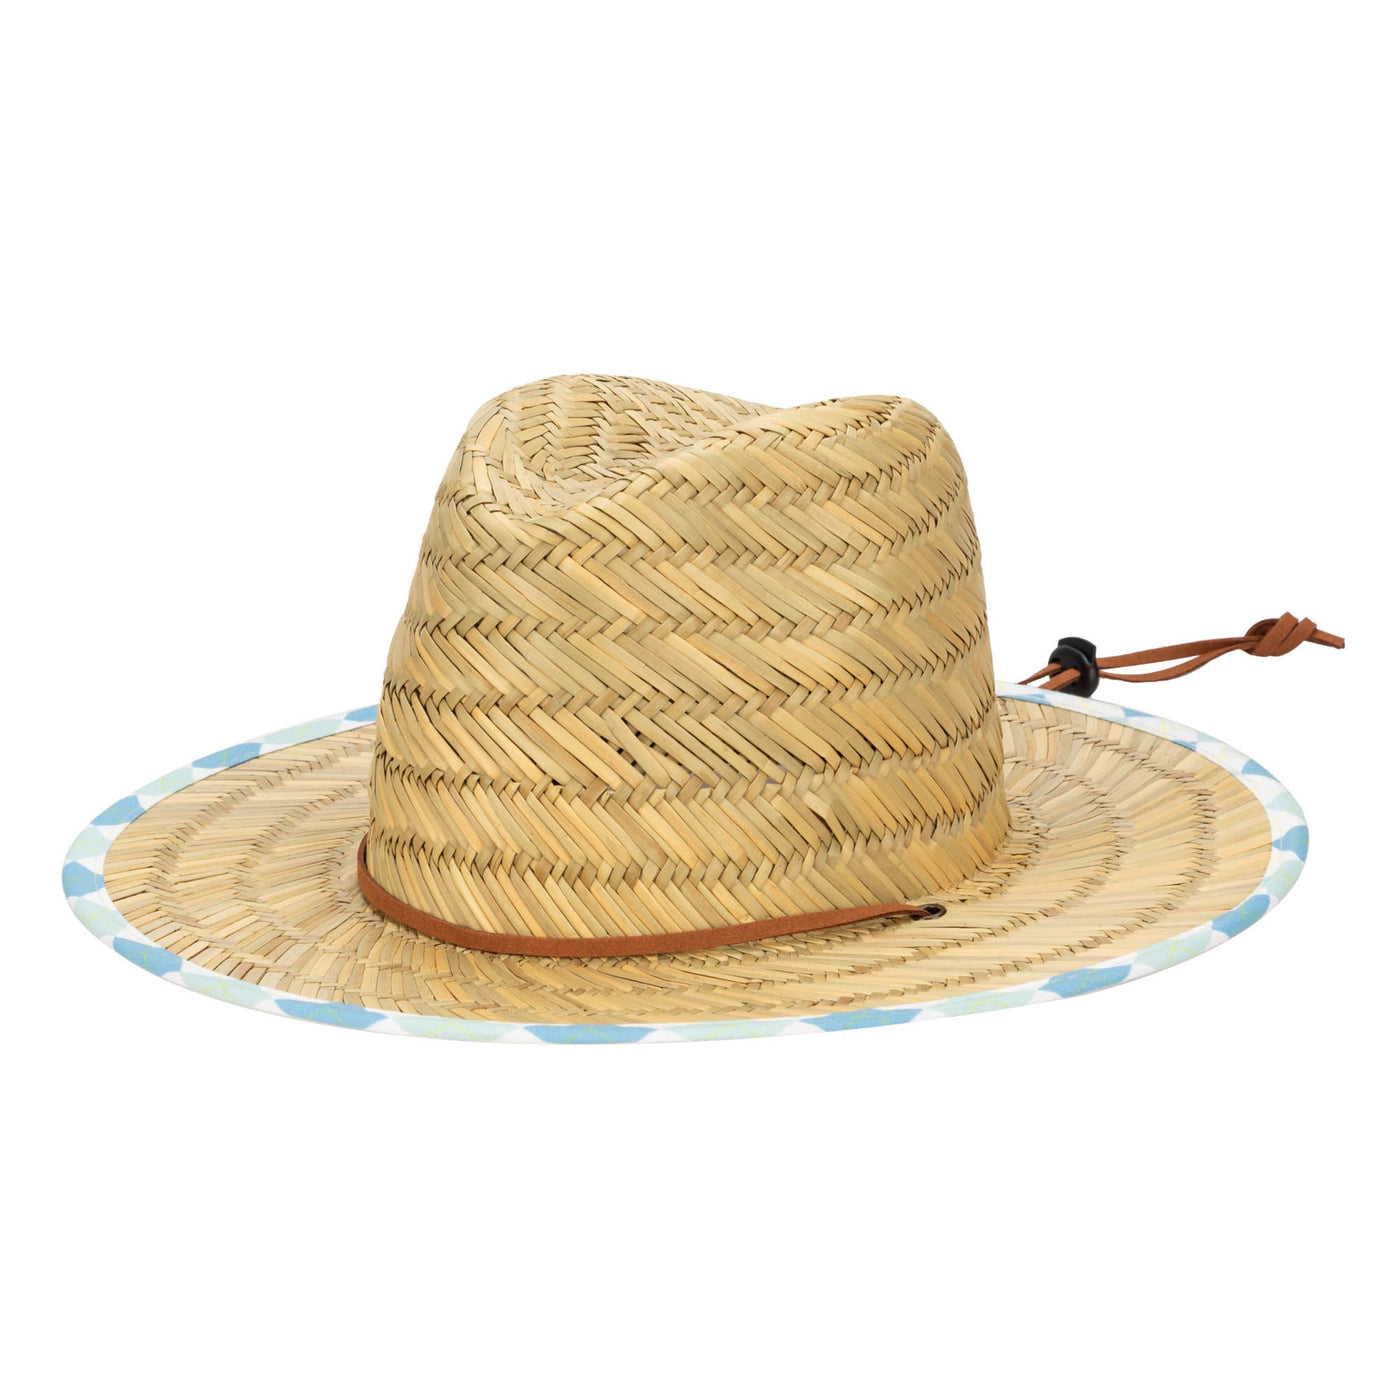 LIFEGUARD - Kids Straw Lifeguard With Plaid Printed Underbrim And Faux Leather Chin Chord